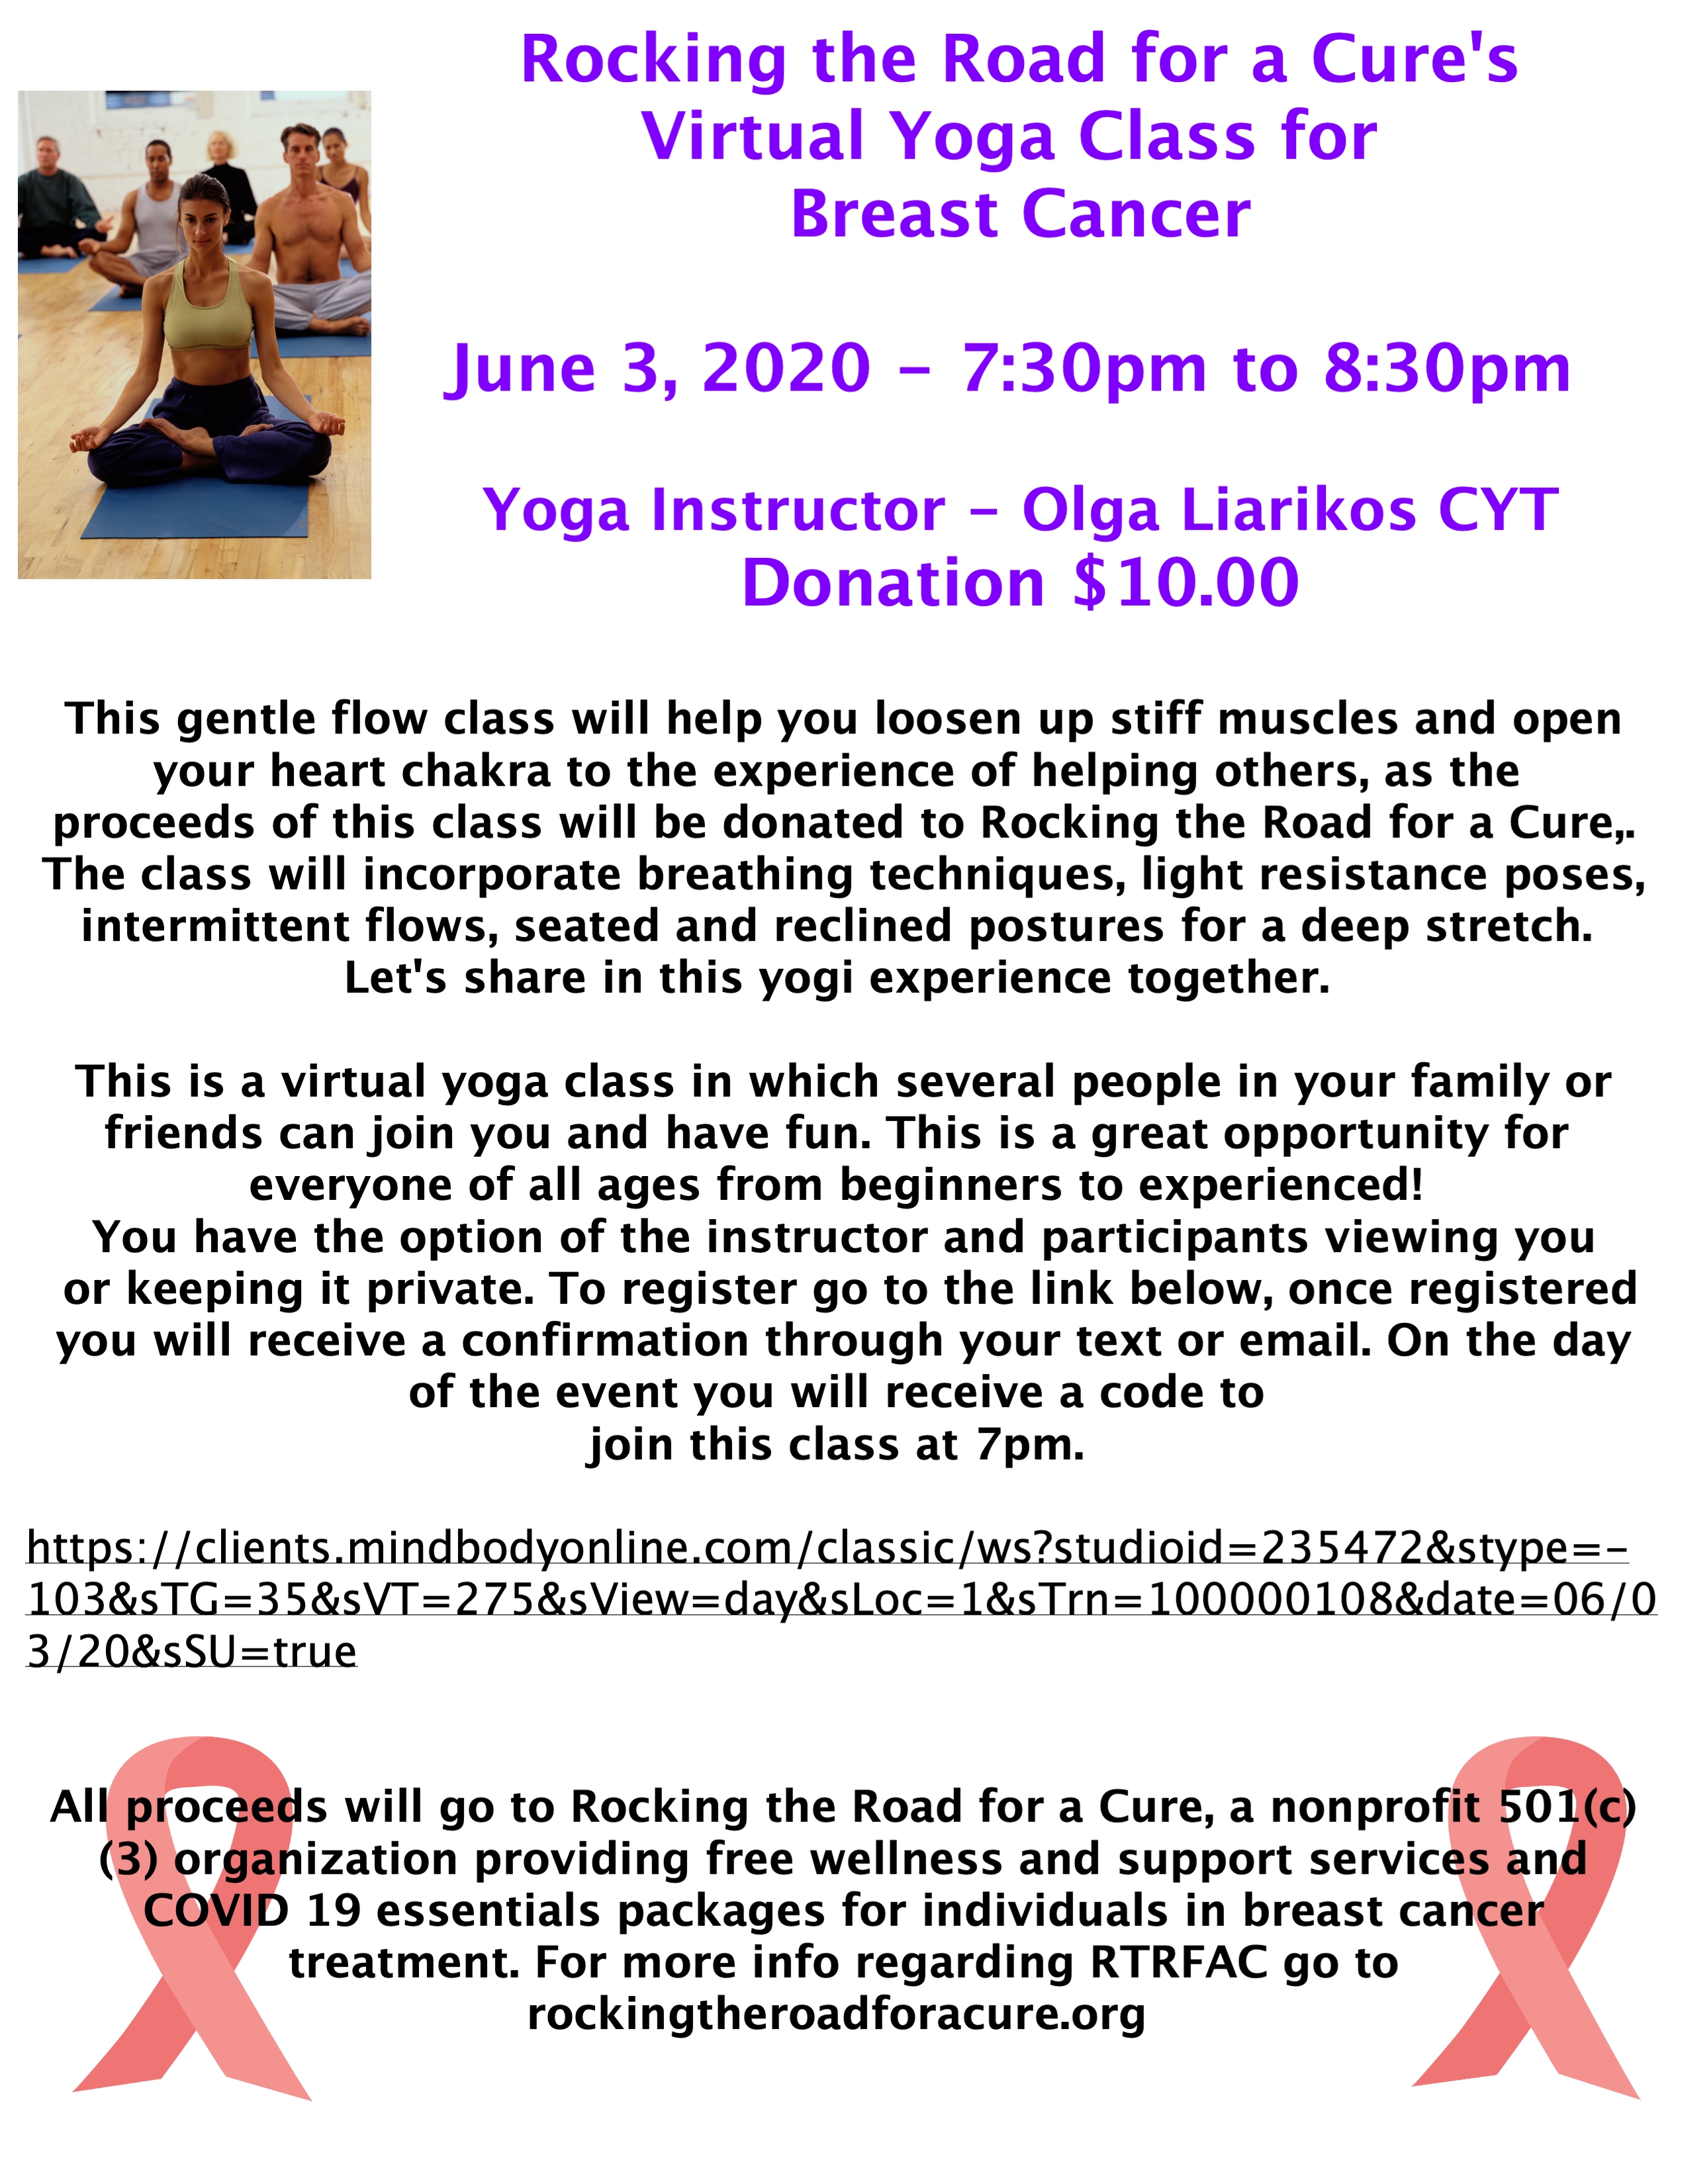 Rocking The Road For A Cure's Virtual Yoga Class for breast cancer